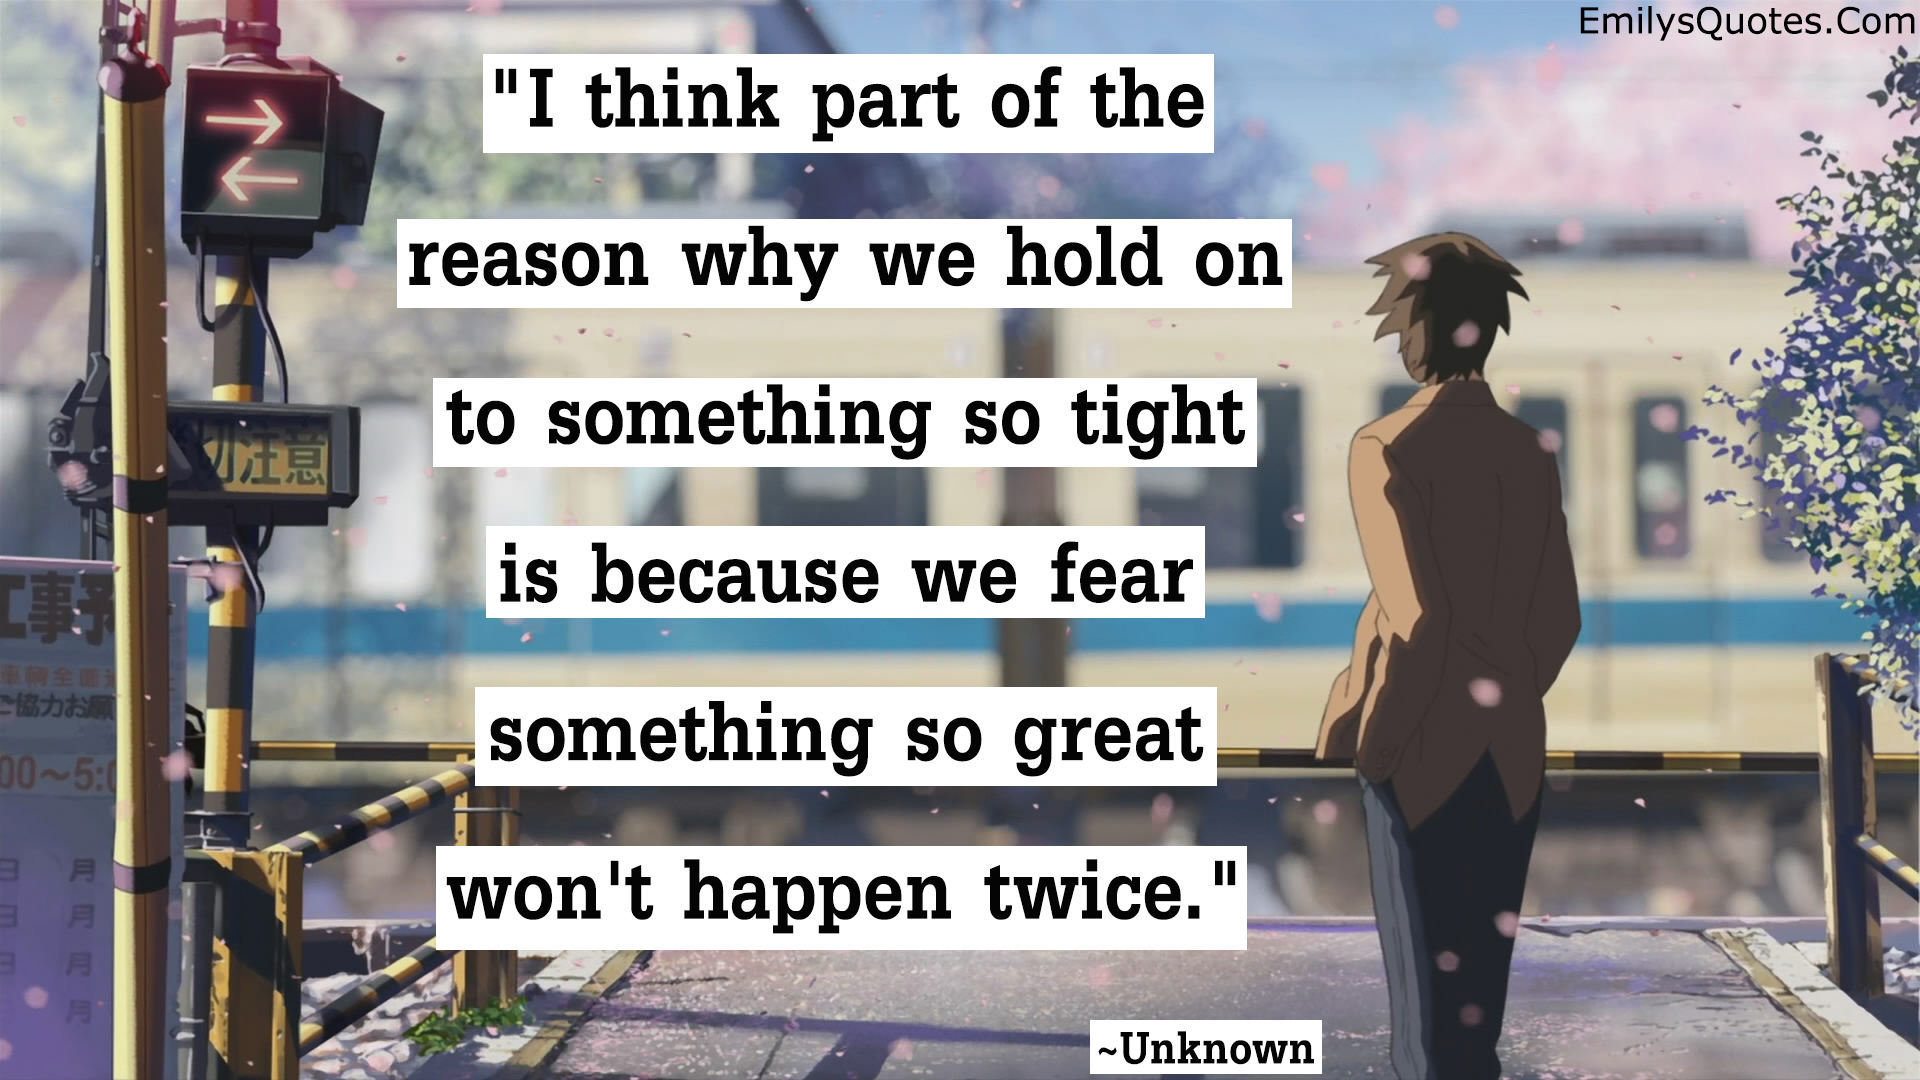 I think part of the reason why we hold on to something so tight is because we fear something so great won’t happen twice